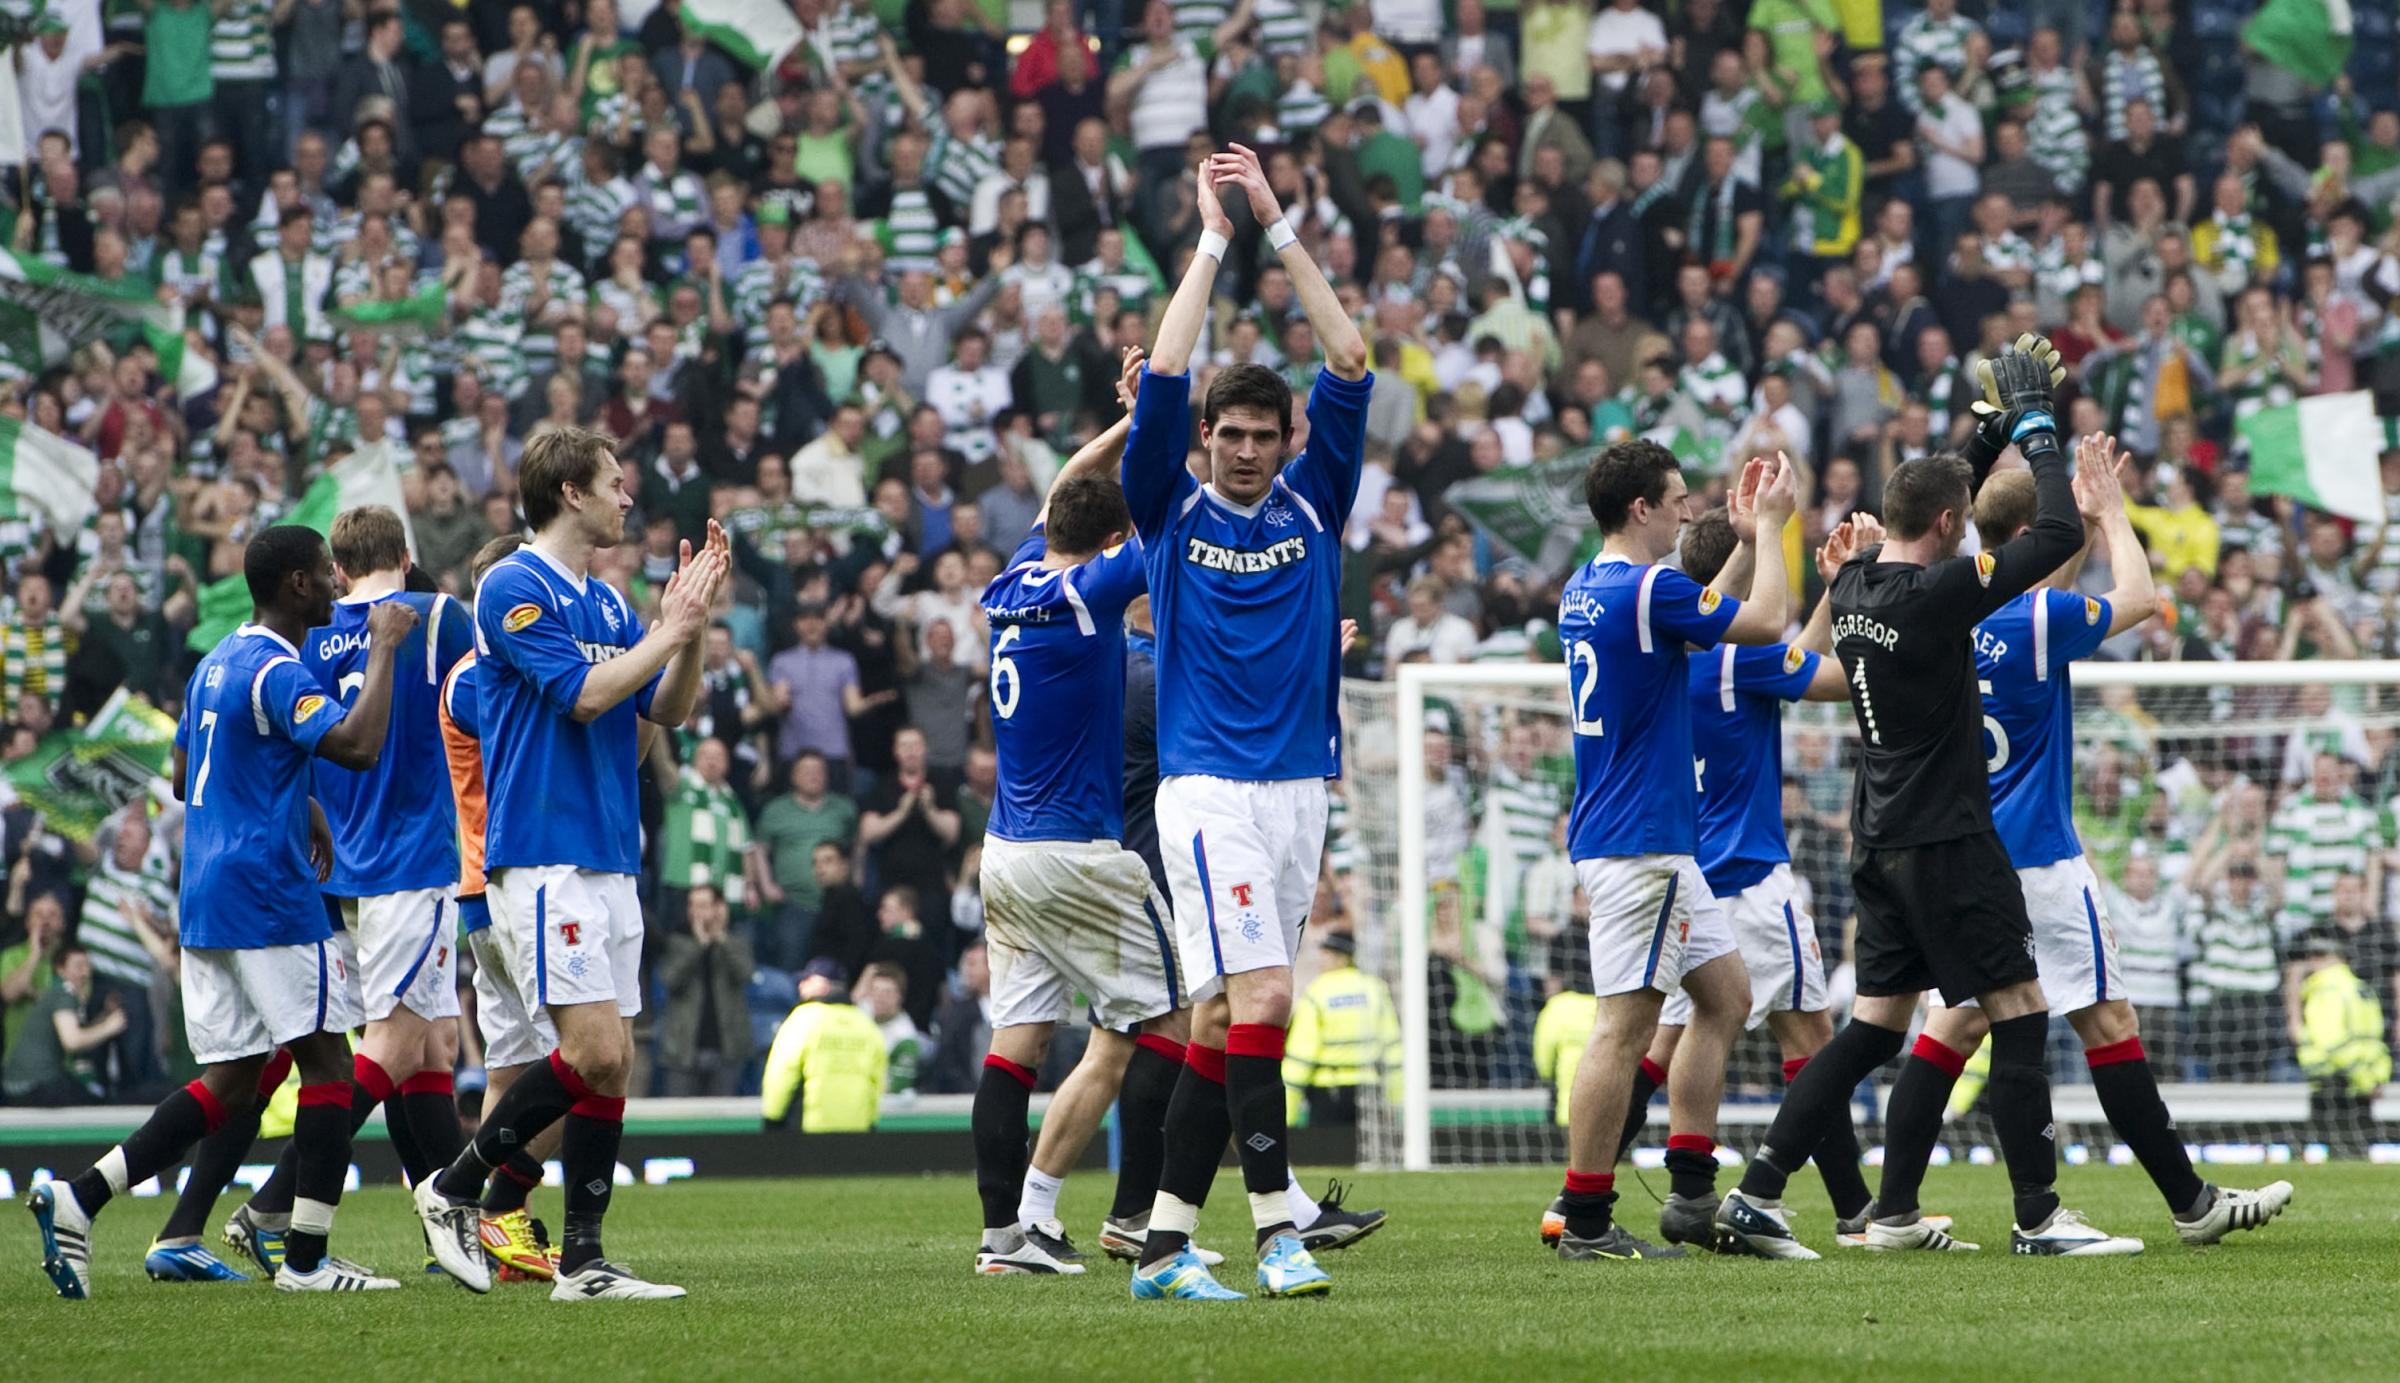 Rangers denied Celtic the chance to confirm the league title at Ibrox back in 2012